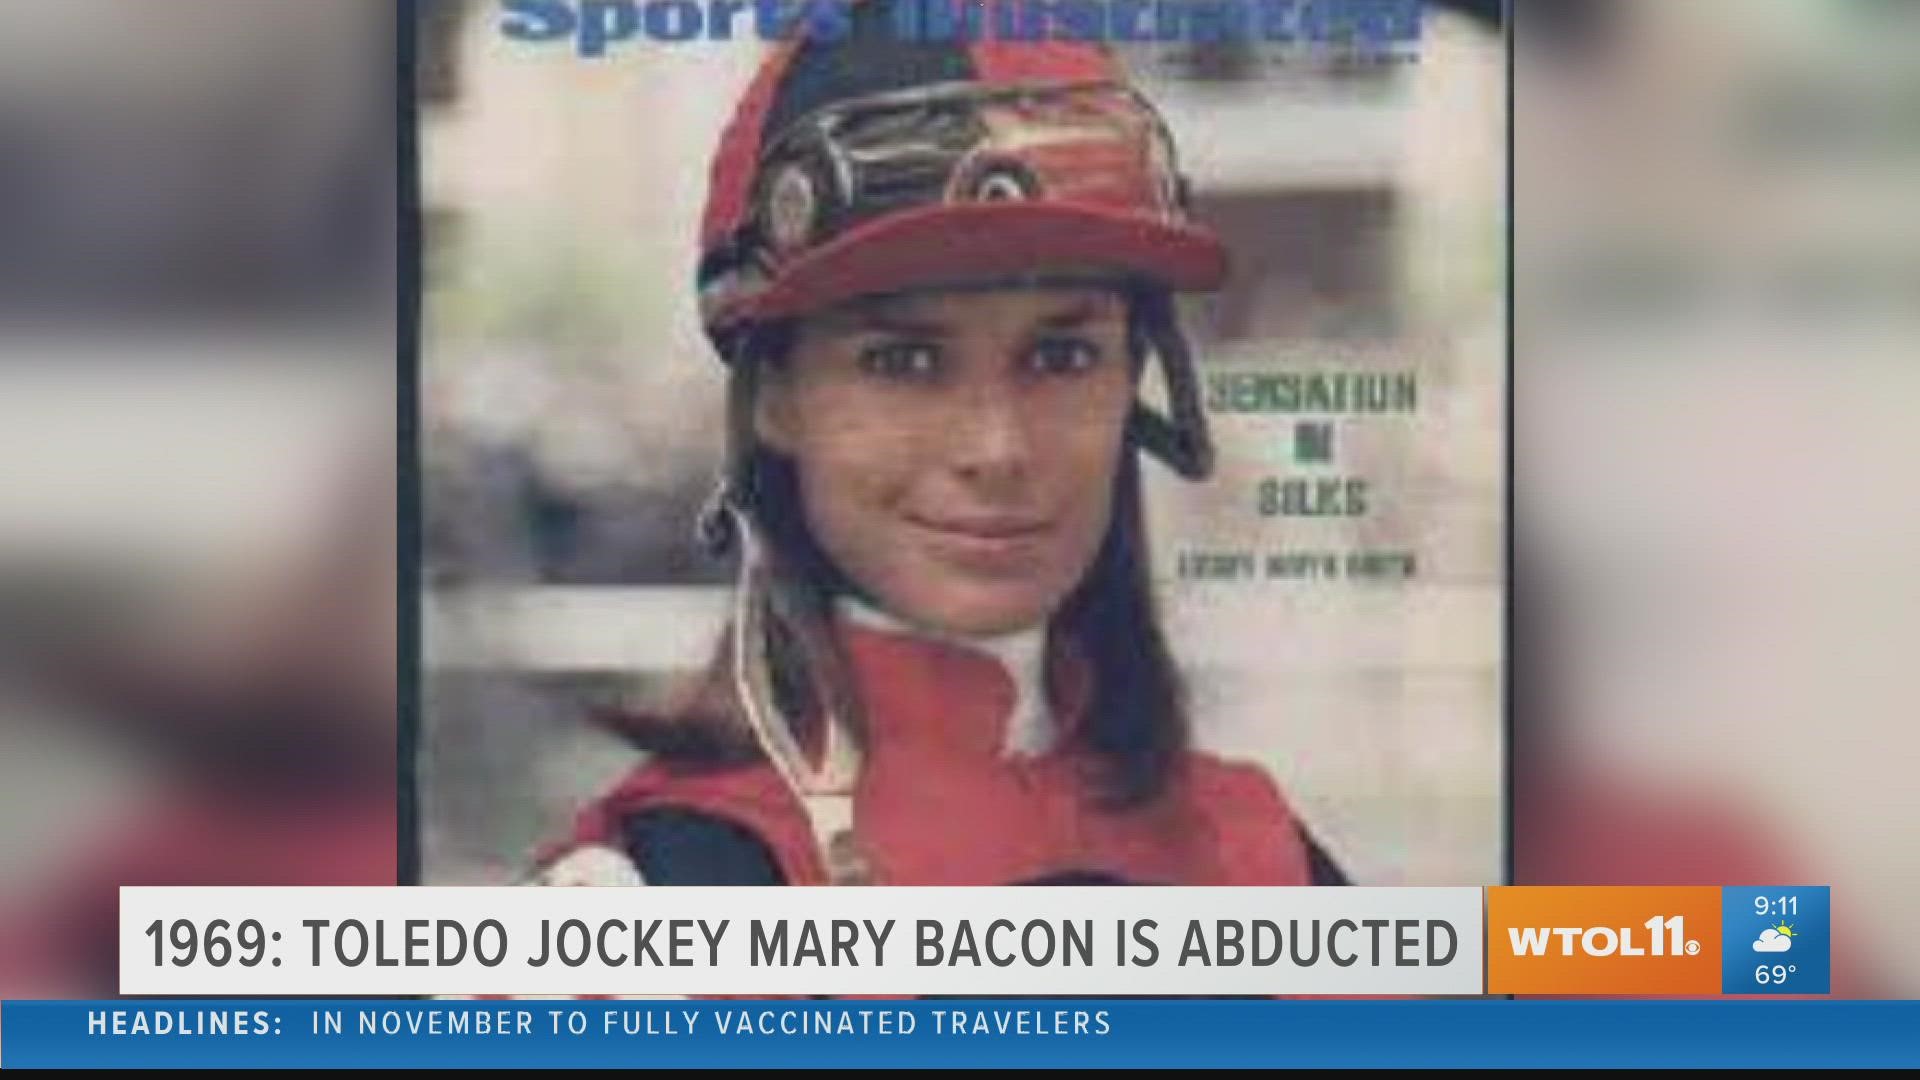 In 1969, one of first female jockeys in the nation, Toledo's Mary Bacon, was abducted after dawn at Pocono Downs racetrack in New York. She was released unharmed.